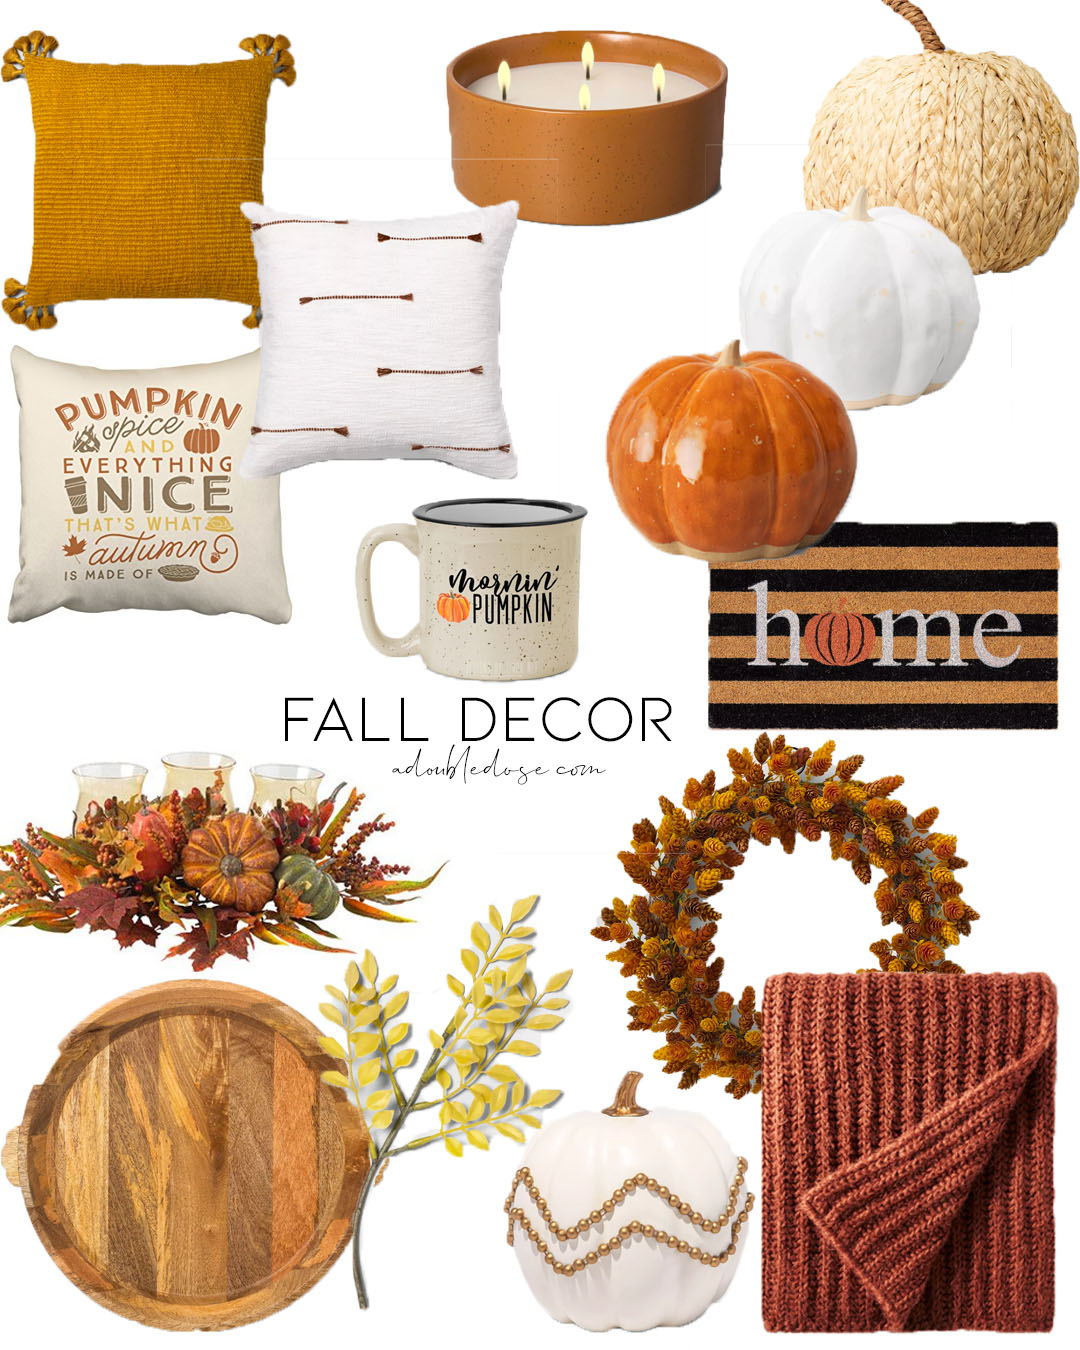 lifestyle and fashion blogger alexis belbel shares some fall home decor for inside and outside from target and walmart: pumpkins, wreaths, throw pillows | adoubledose.com